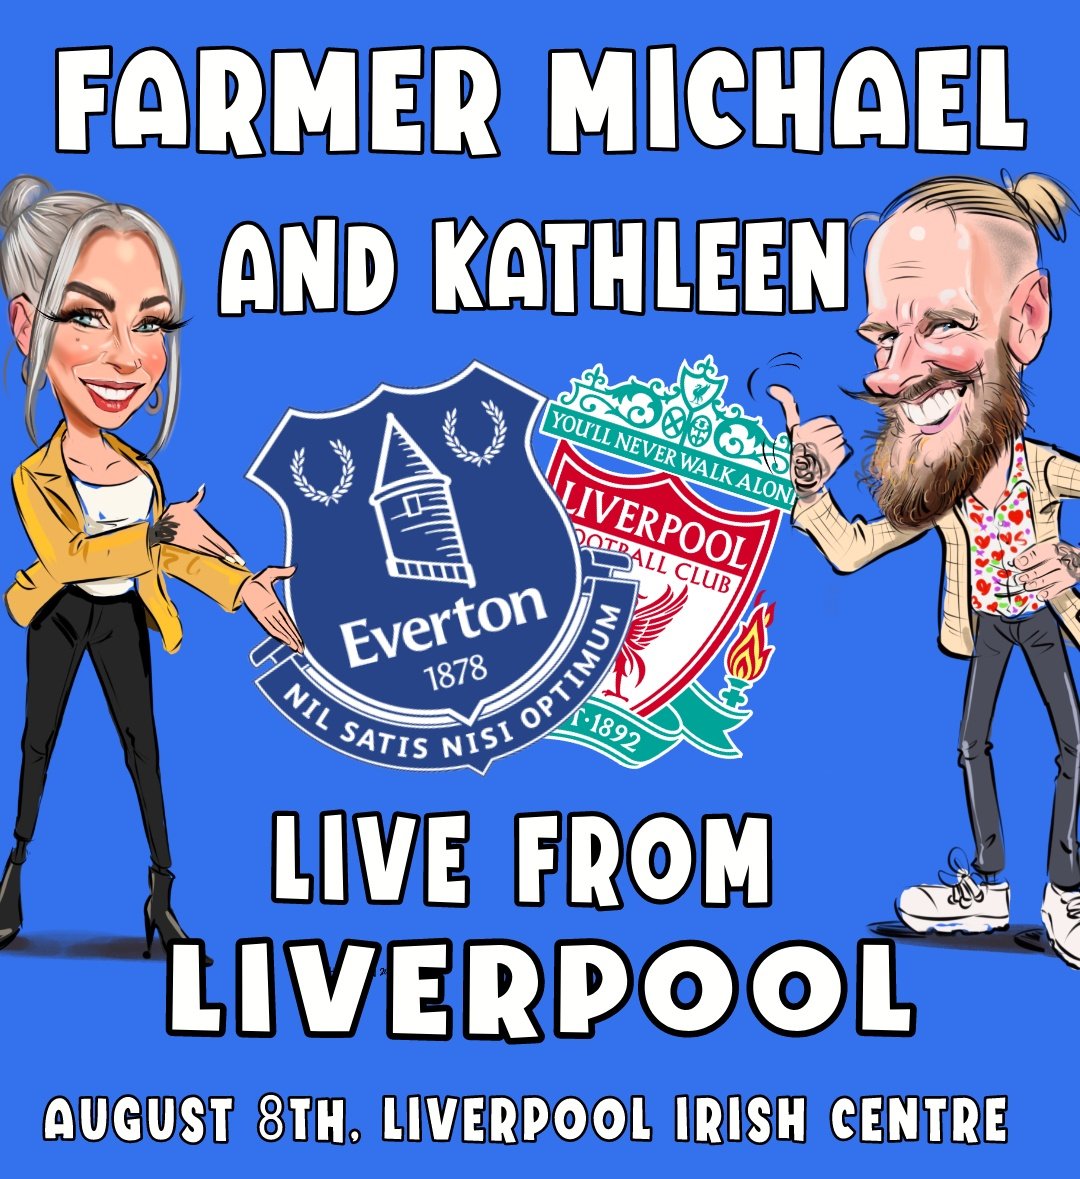 It's on baby, it's on! Everton's craziest fan live and loud in Liverpool for the first time in four years!!! Join Farmer Michael and his long-suffering wife Kathleen for a night of songs, sketches, and general insanity! For details: tinyurl.com/3tv738ts